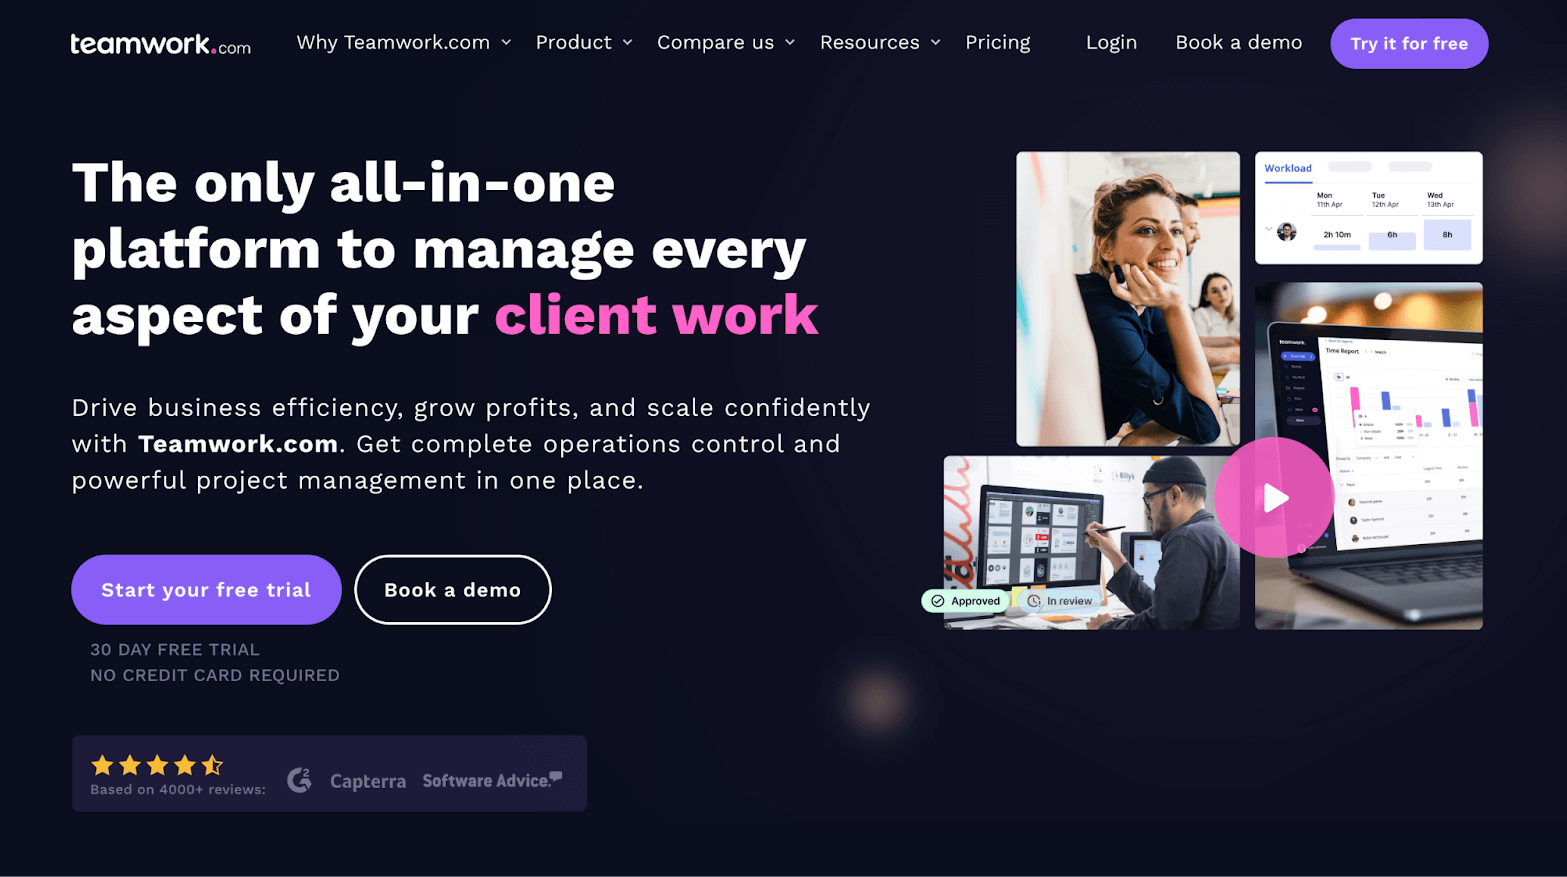 Teamwork.com homepage: The only all-in-one platform to manage every aspect of your client work